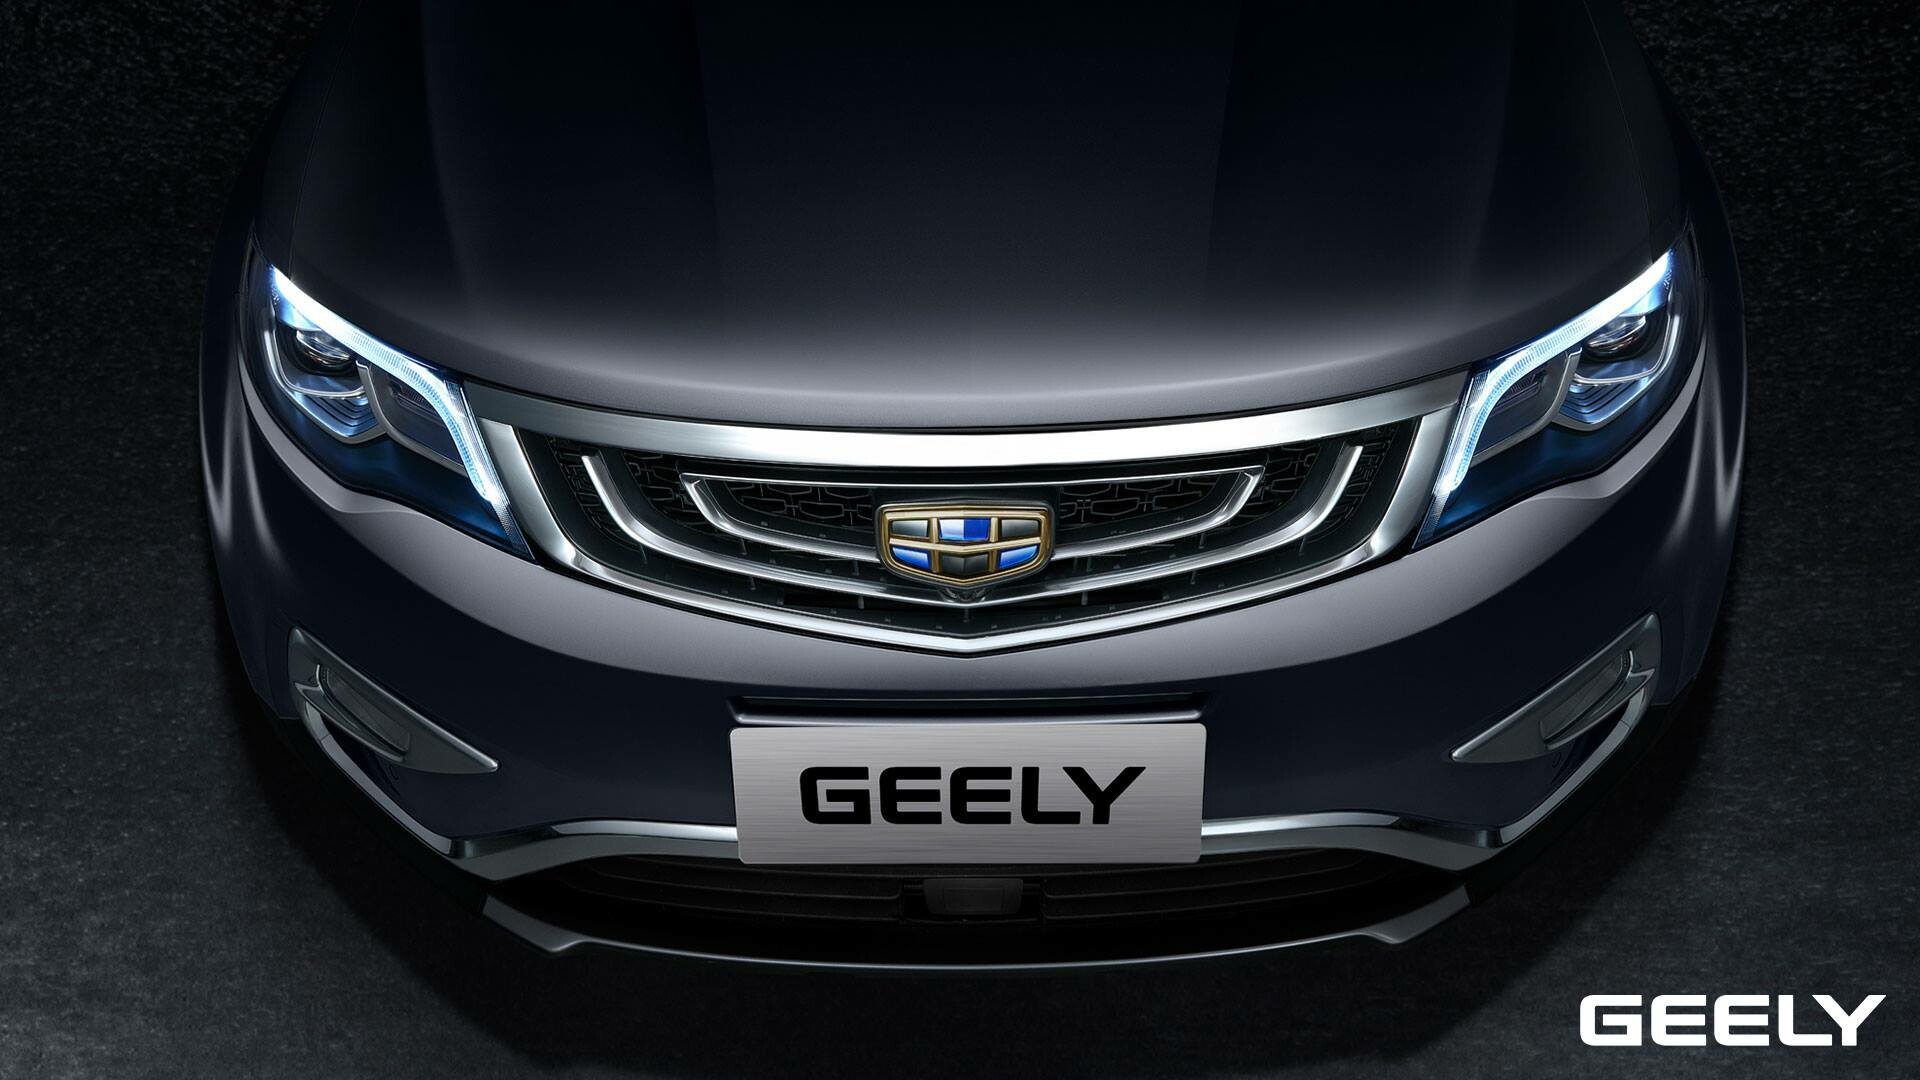 Geely: Model Lanza, Began selling the Emgrand EC7 in the United Kingdom at the end of 2012. 1920x1080 Full HD Background.